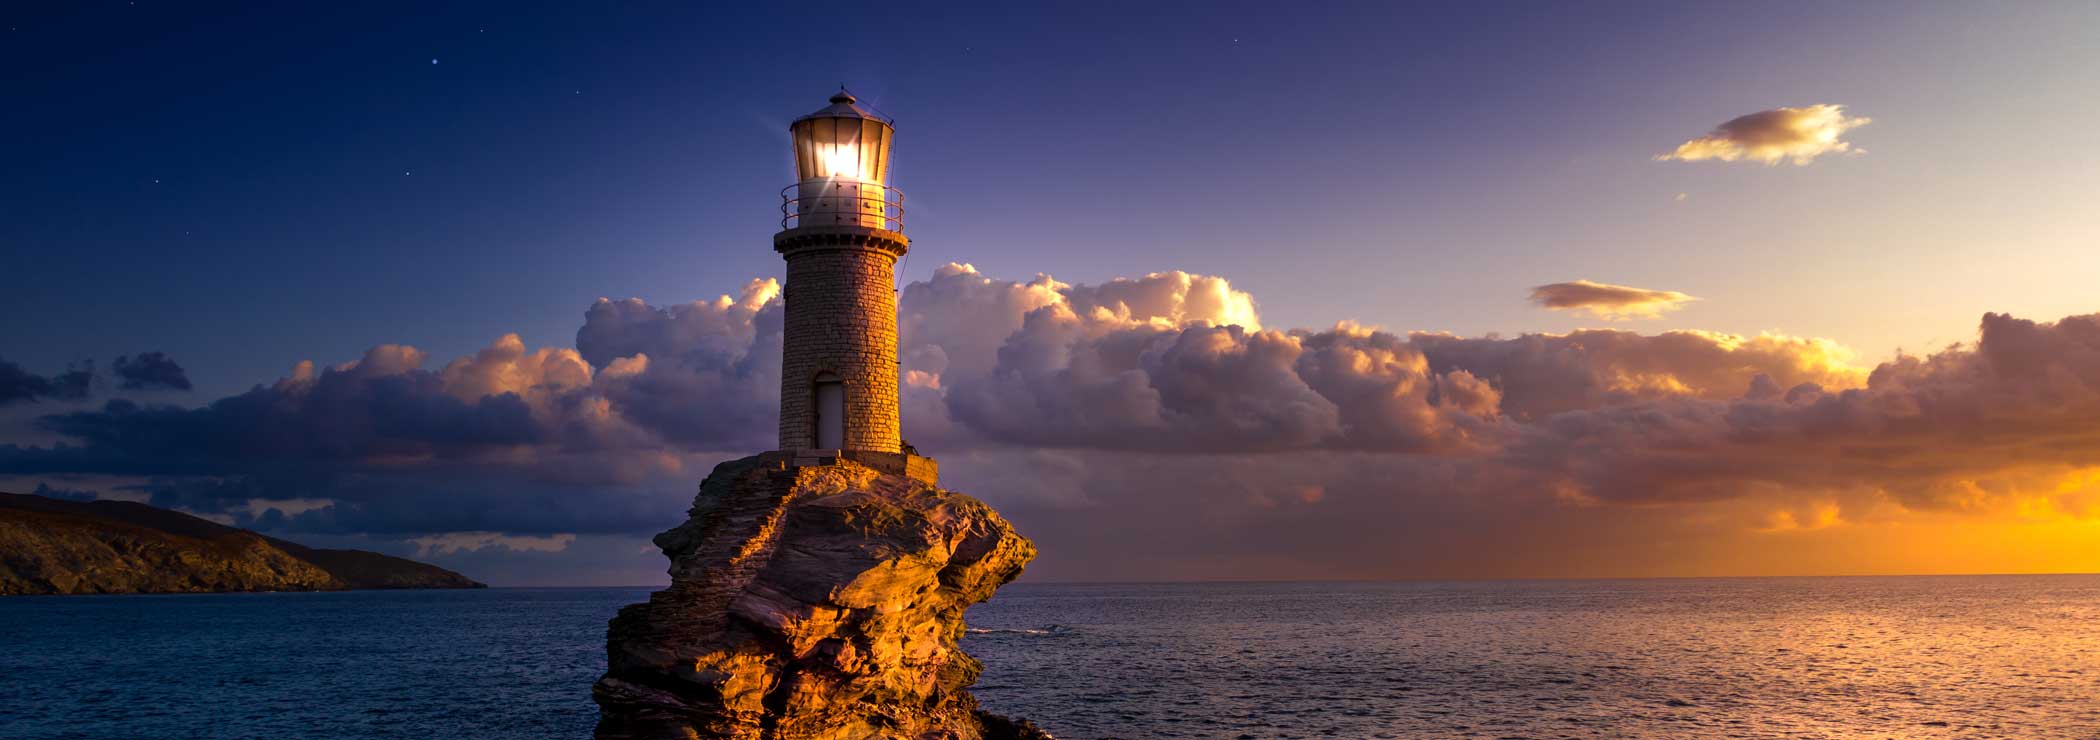 Lighthouse in the twilight